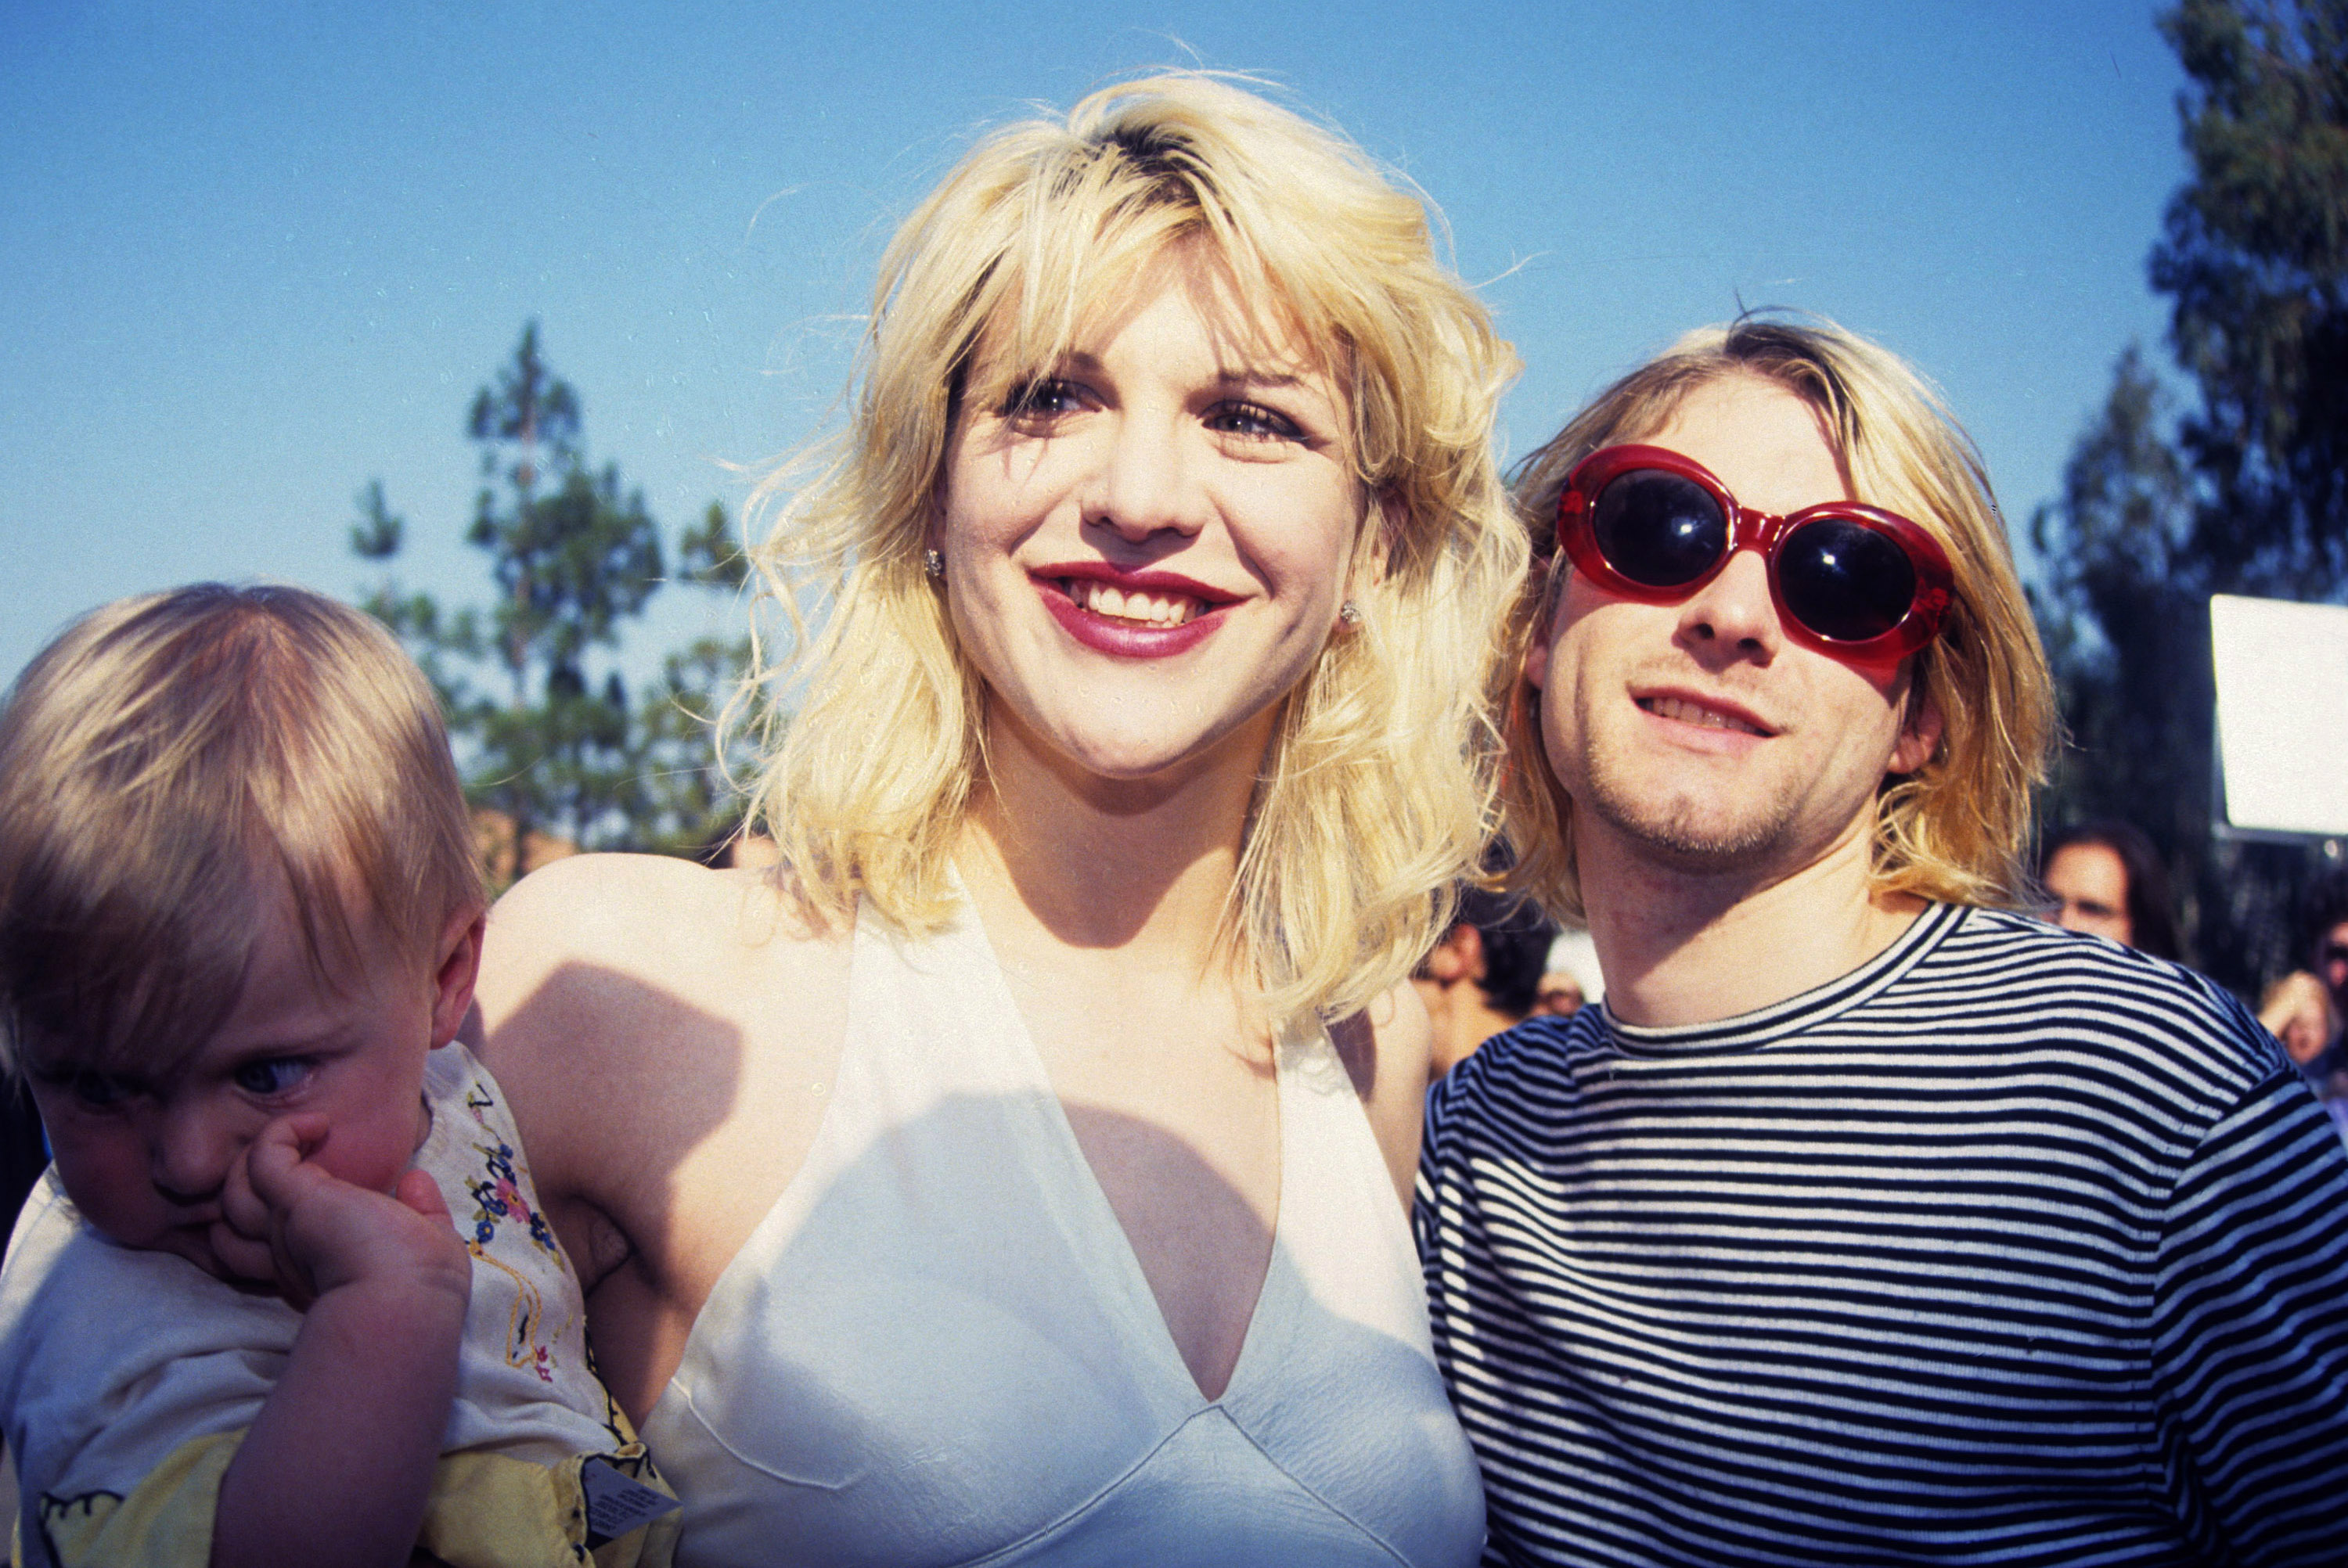 Kurt Cobain of Nirvana (right) with wife Courtney Love and daughter Frances Bean Cobain (Photo by Terry McGinnis/WireImage)